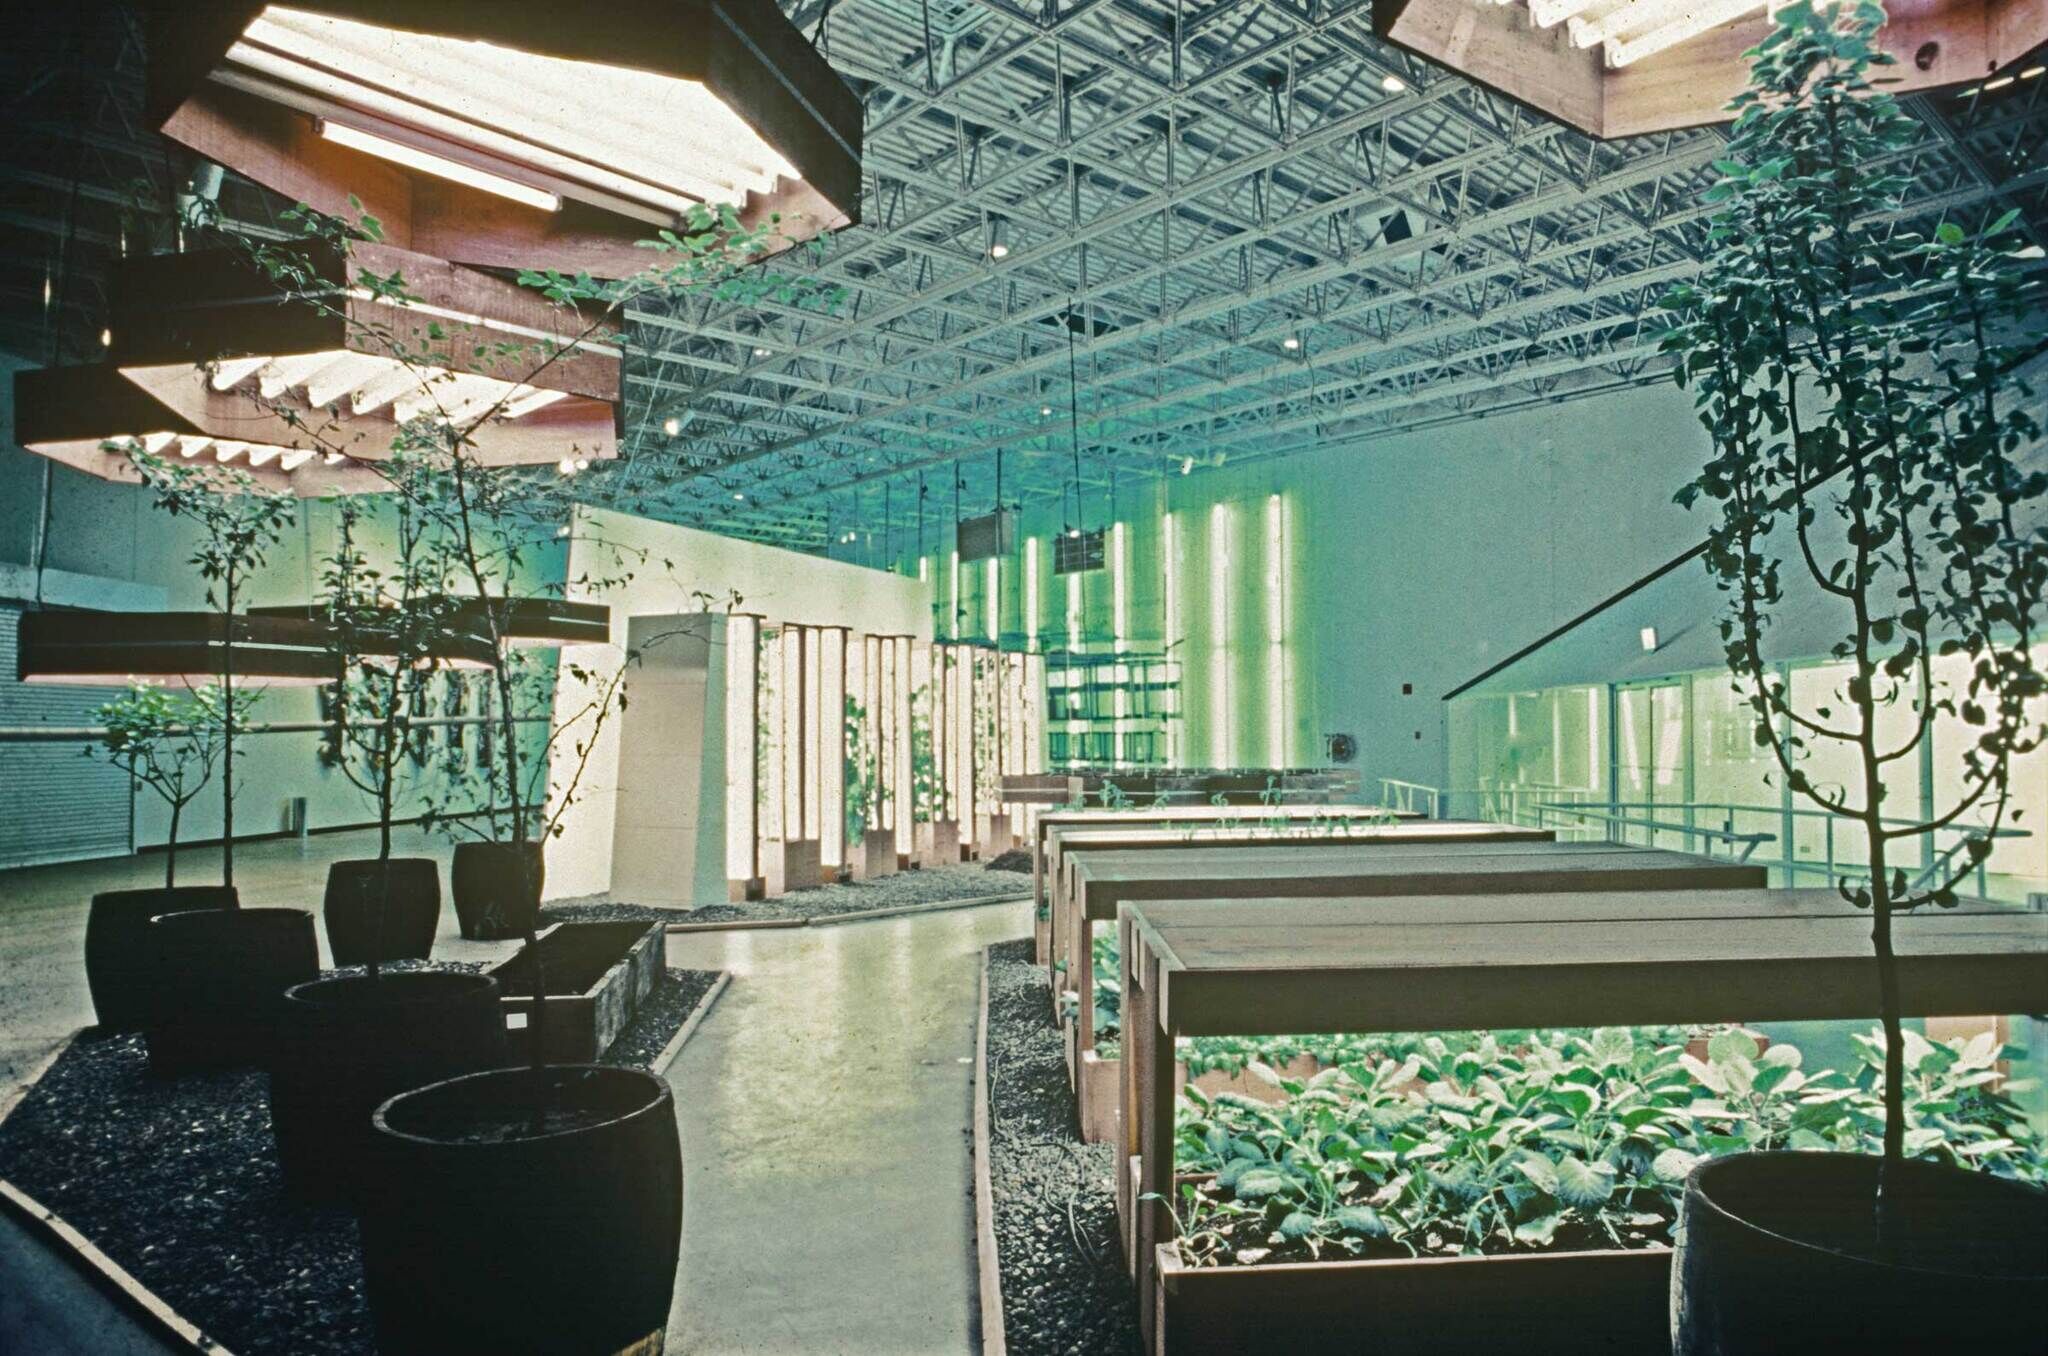 Indoor garden with potted plants and raised beds under large, rectangular grow lights. The space has a high ceiling with exposed beams.